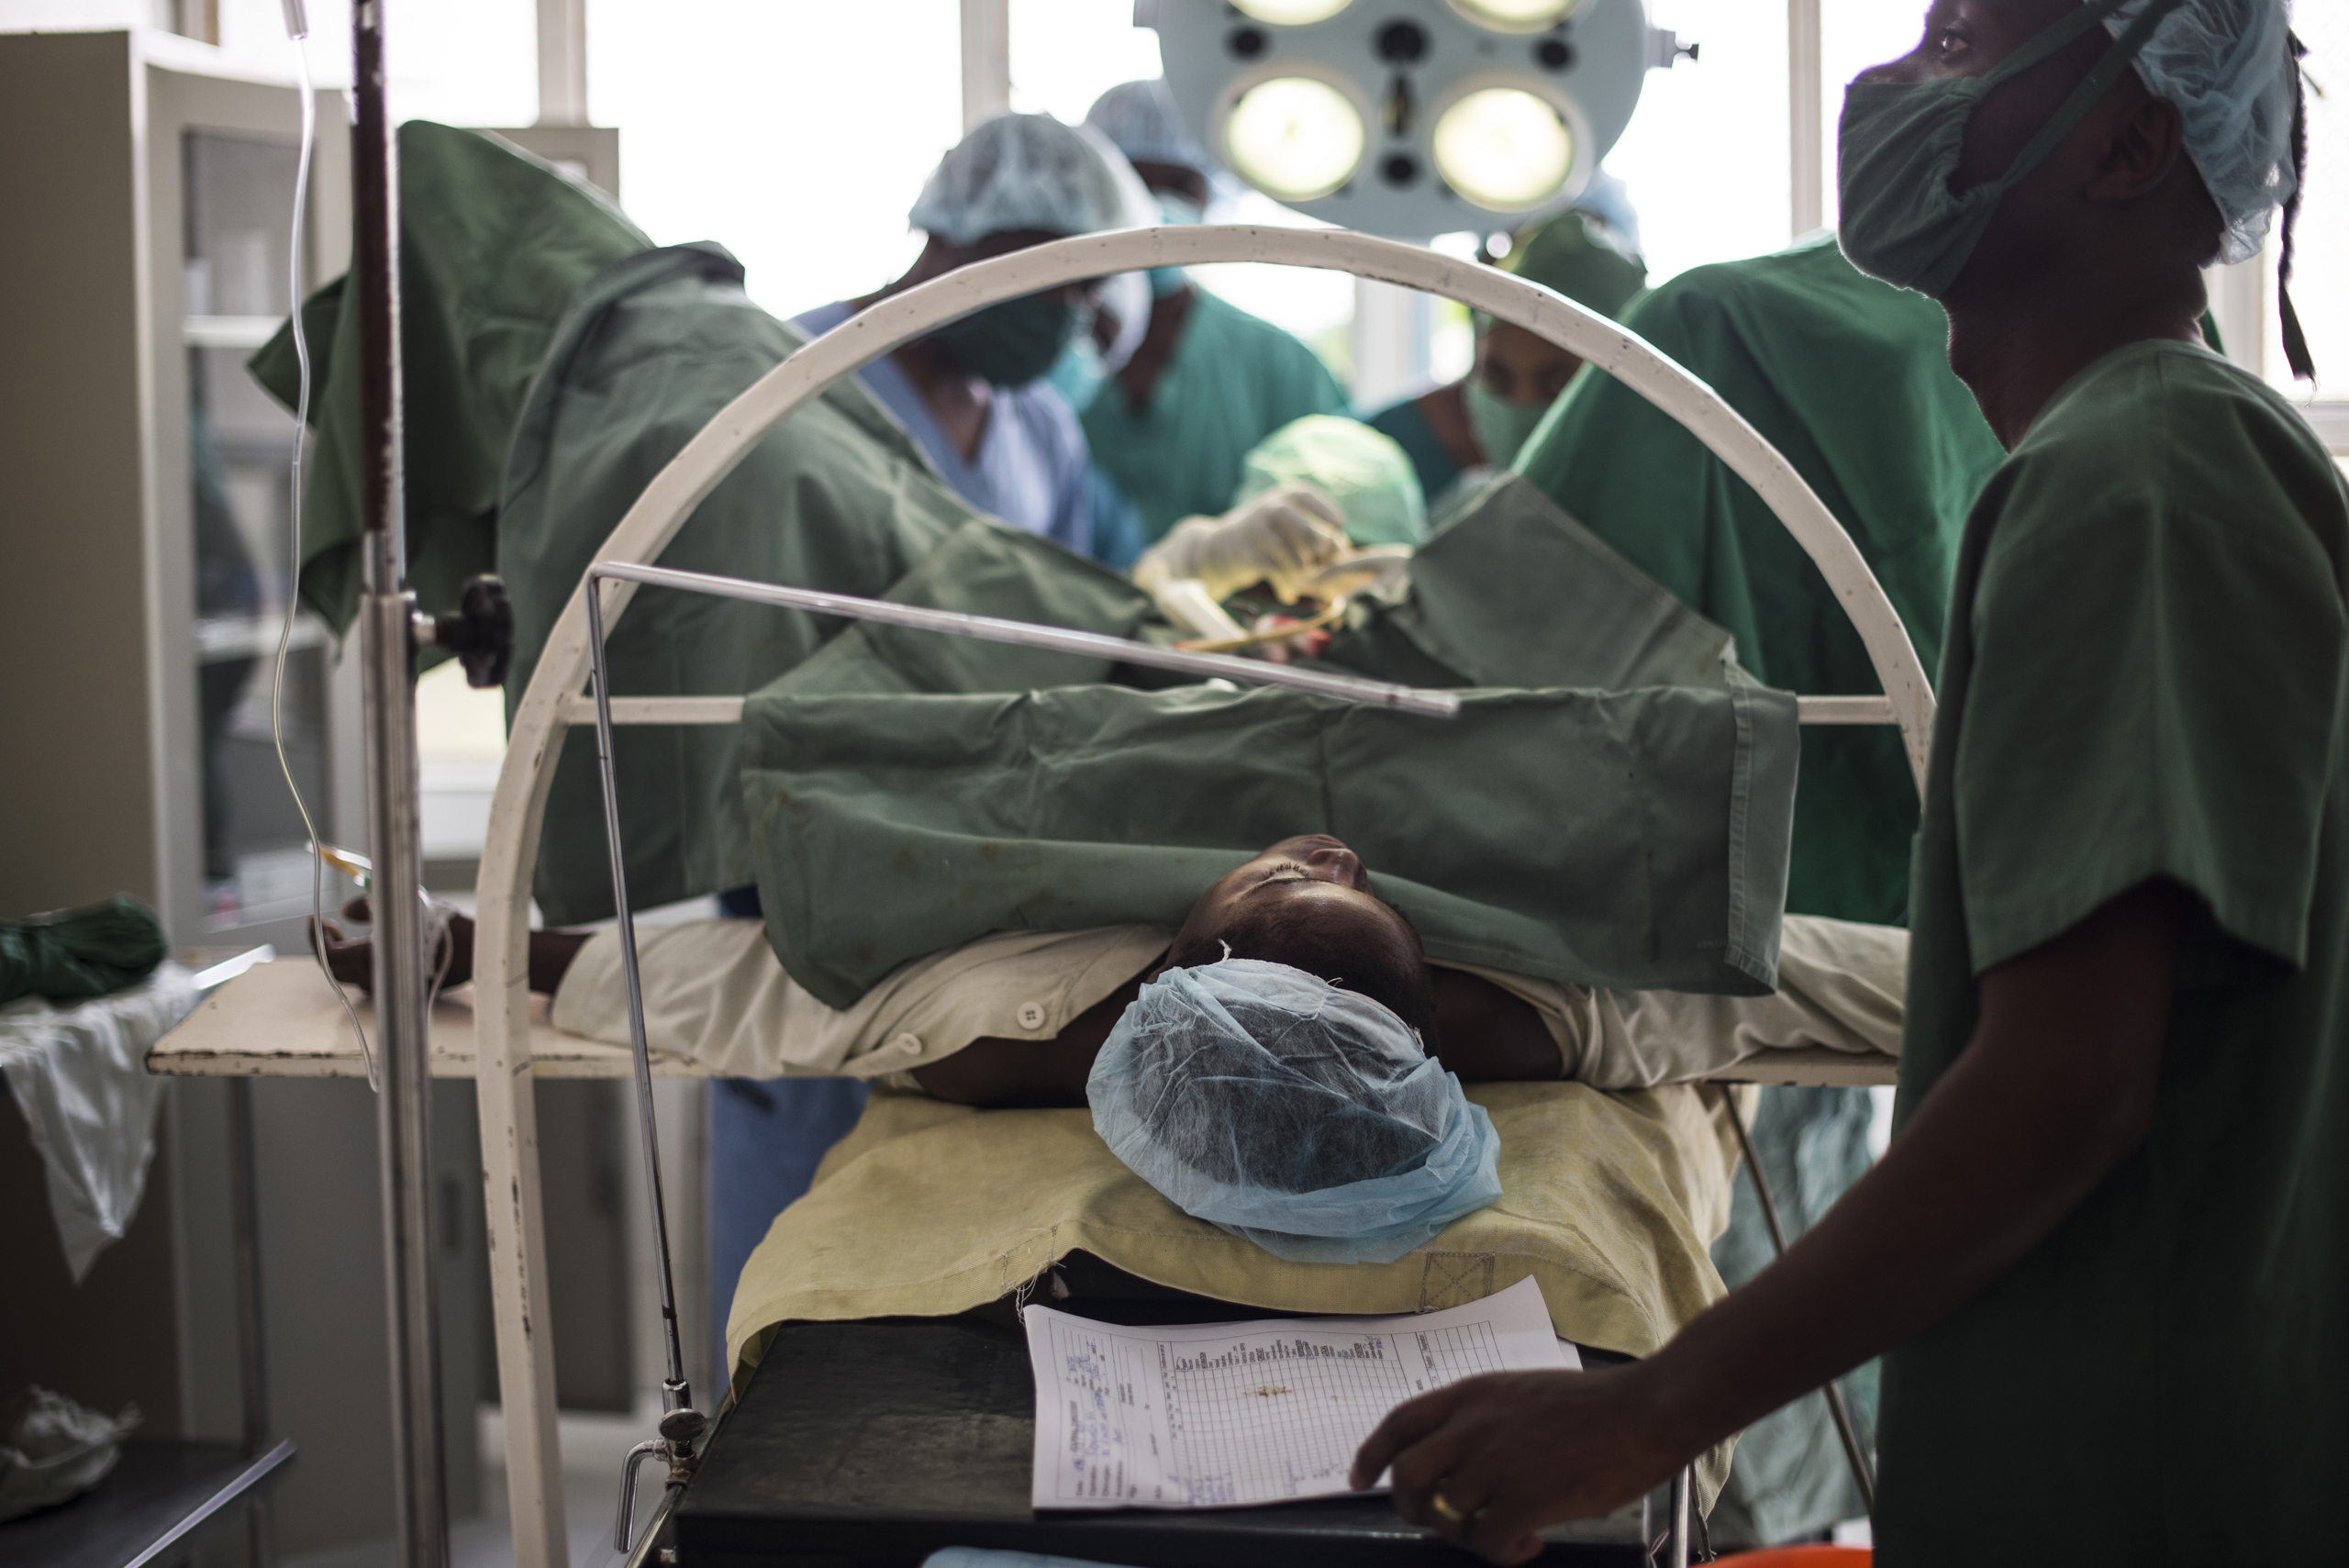 A woman receives fistula repair surgery in the Keyshero hospital in Goma, Democratic Republic of Congo, Dec. 5, 2015.Many women need fistula repair after rape. It's one of the biggest injuries post sexual assault. Women with fistulas from rape cannot retain their urine or feces.